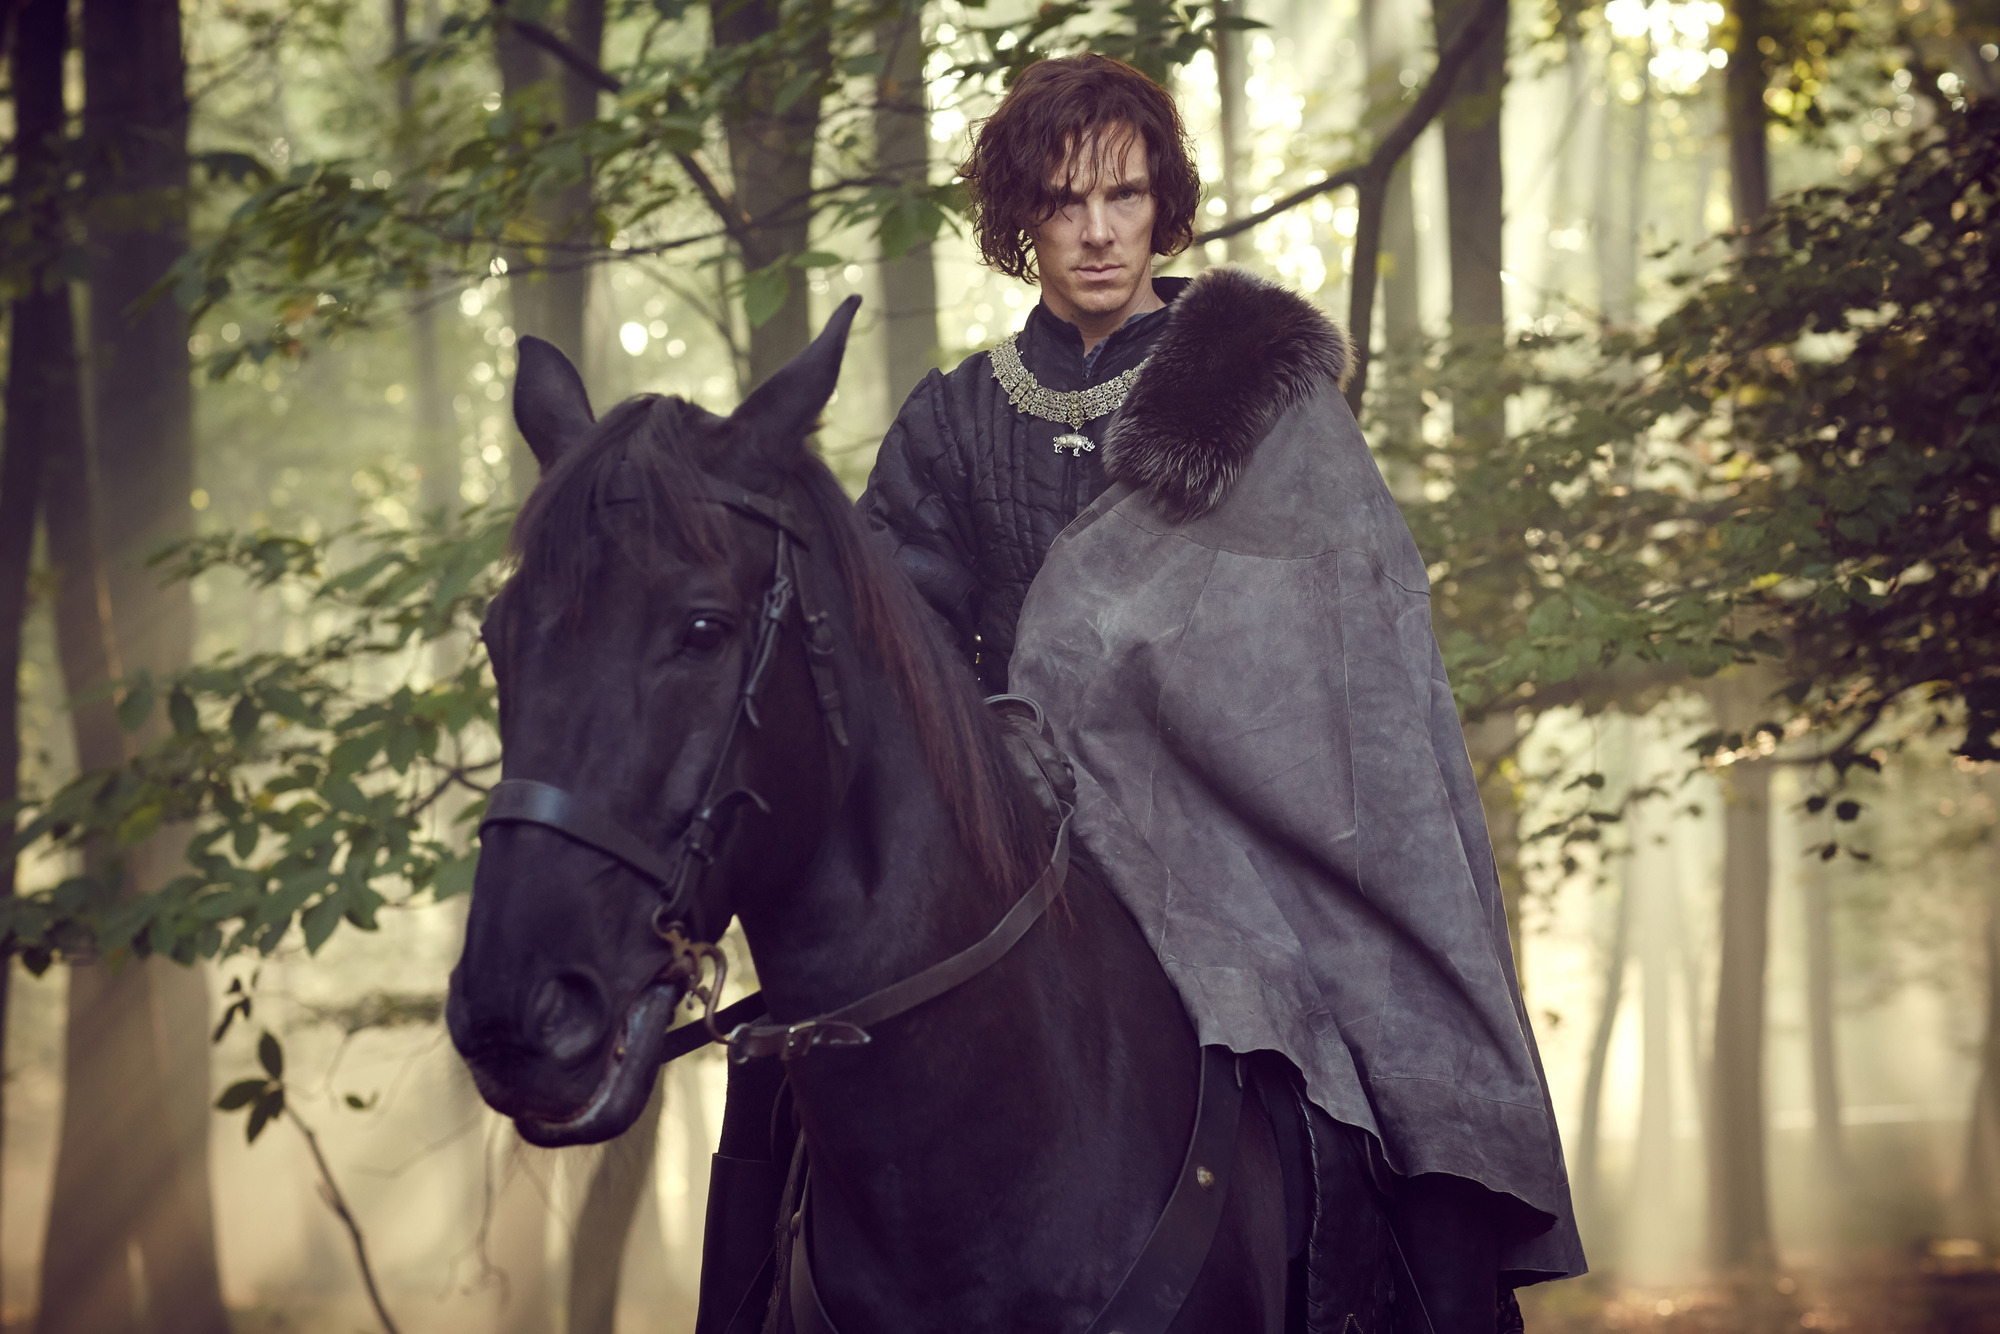 The Hollow Crown 2